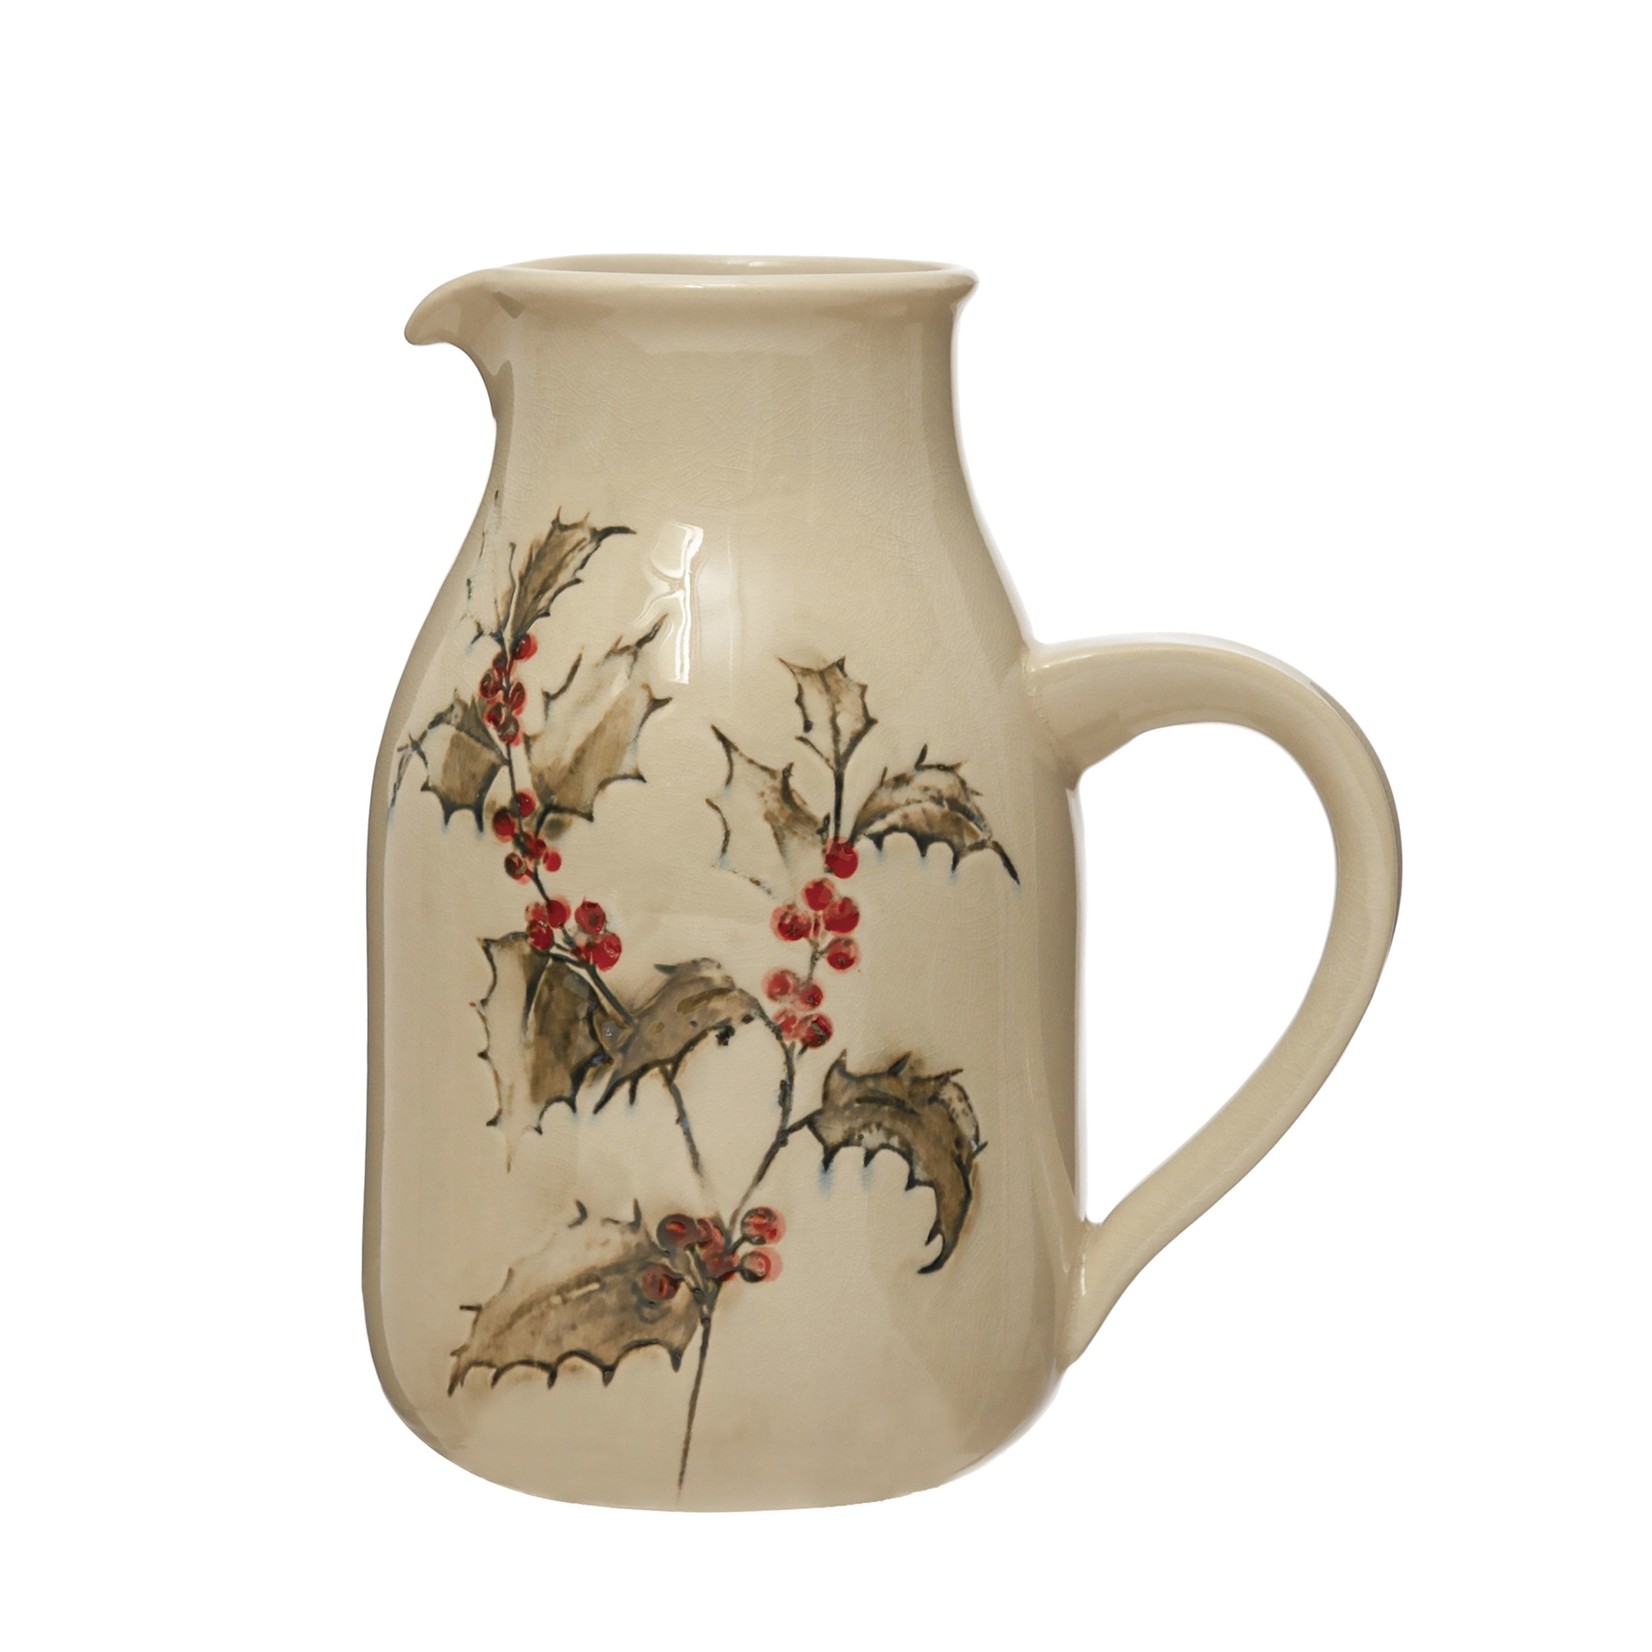 Debossed Stoneware Pitcher w/Holly